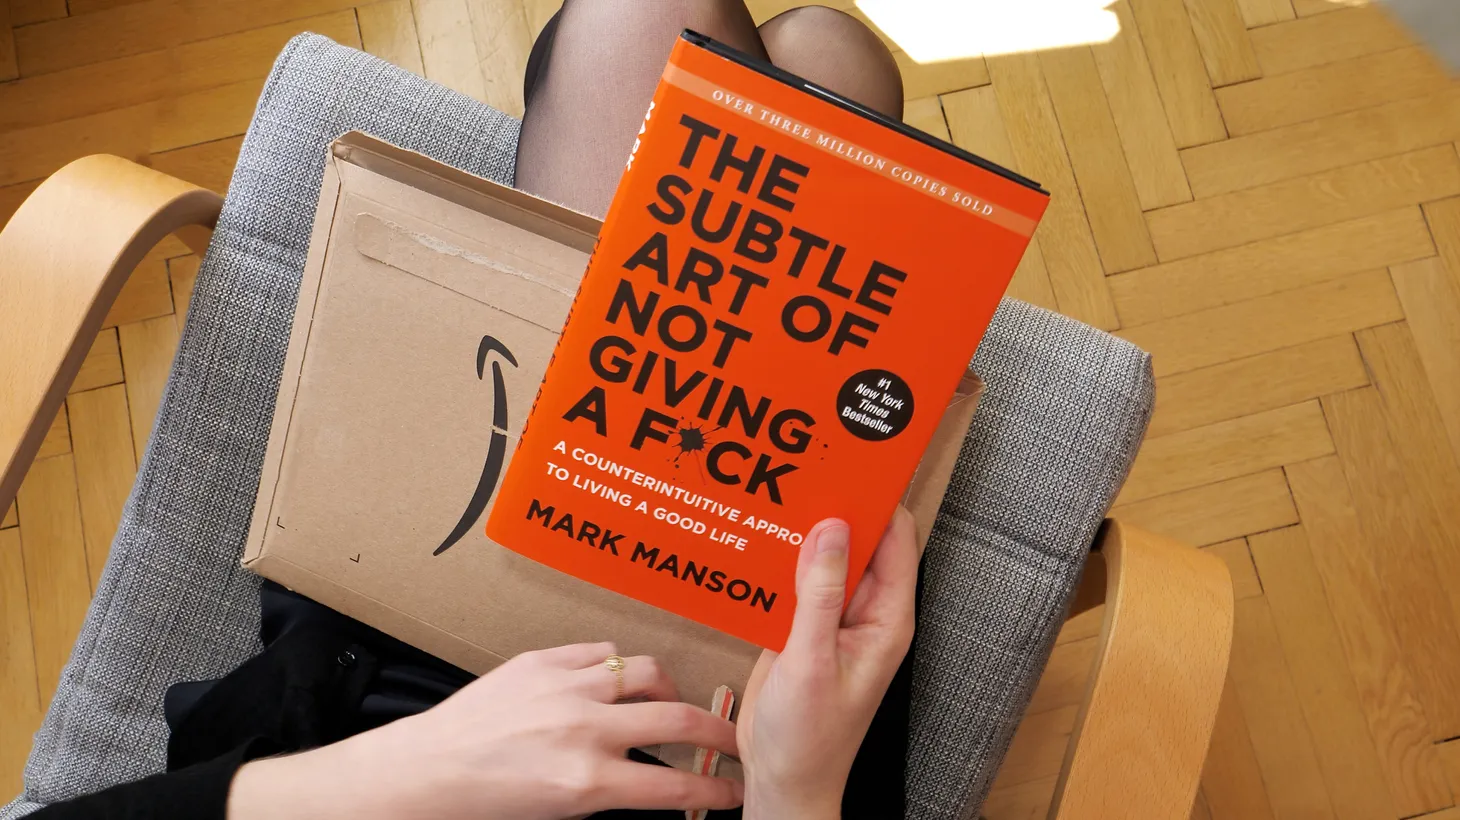 Mark Manson, 'The Subtle Art 'Author, On His Path to Self-Help